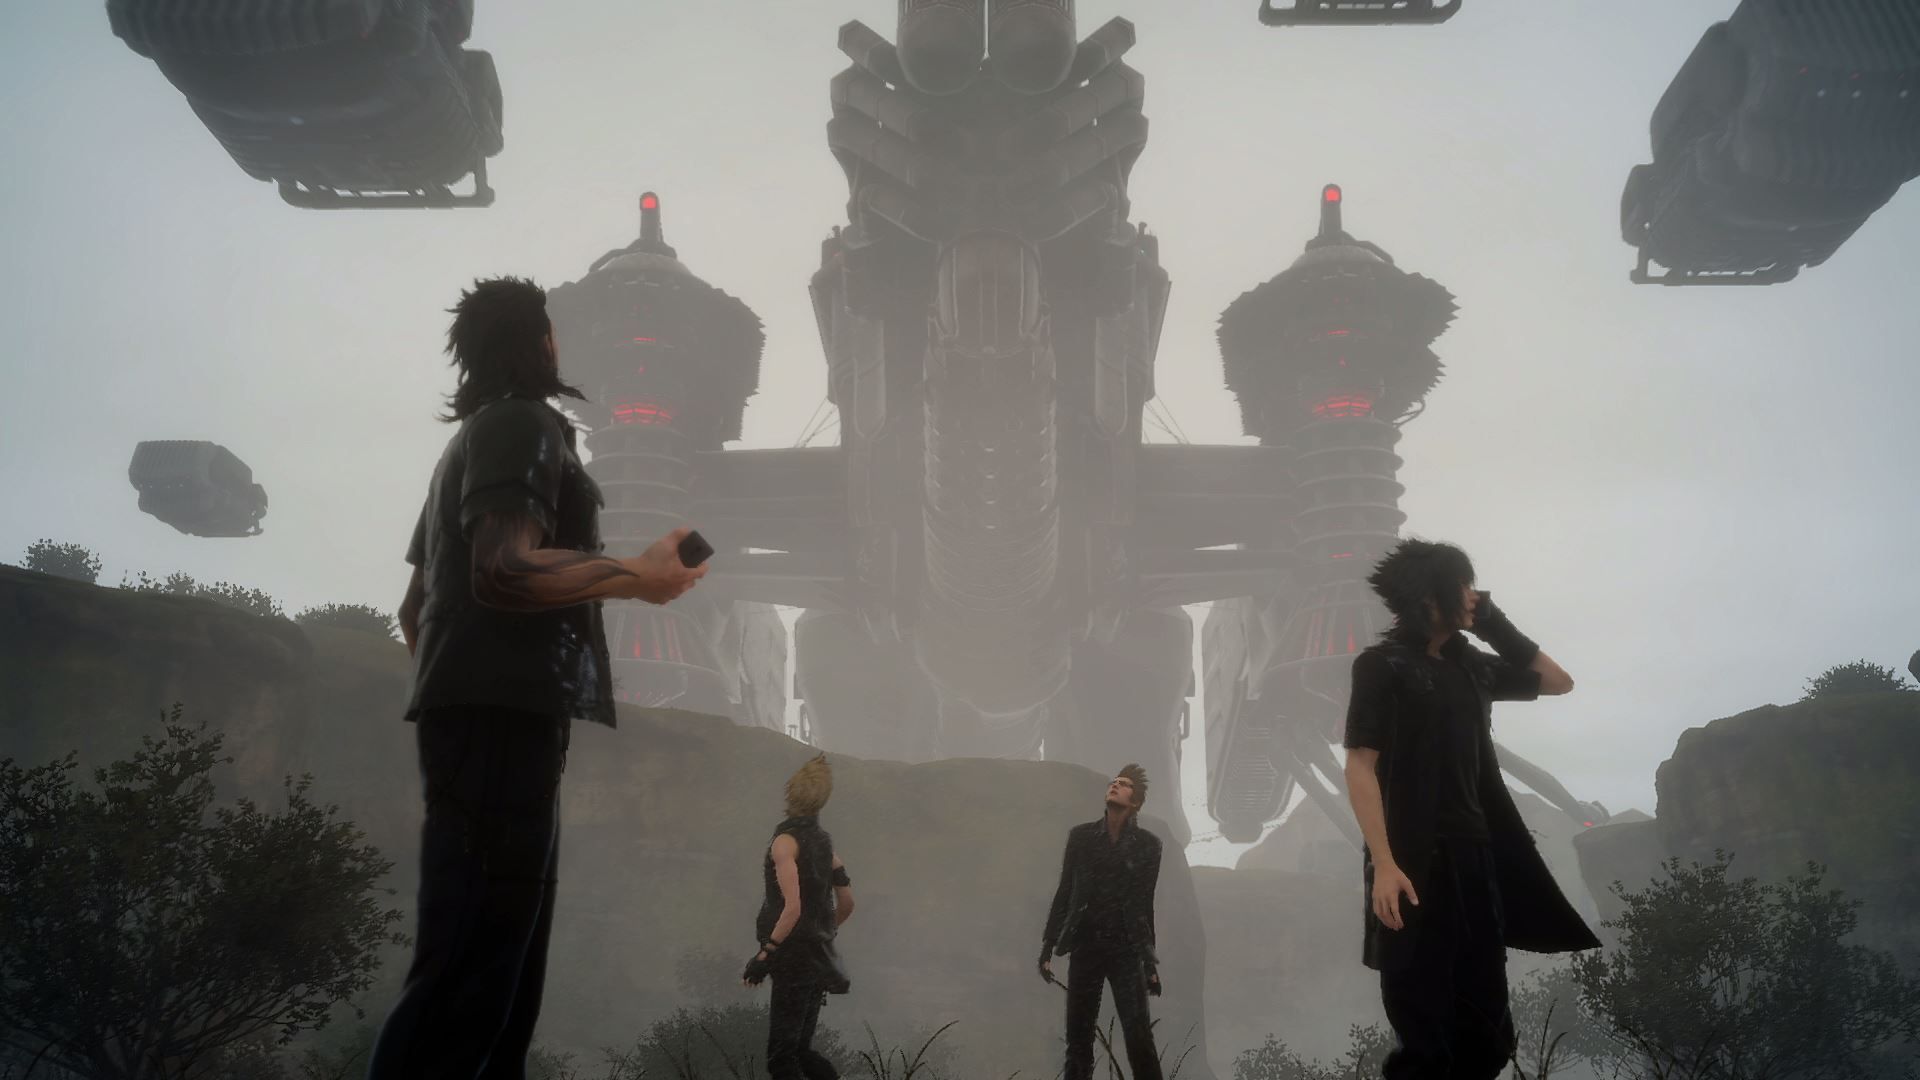 final fantasy xv everything you need to know image 1